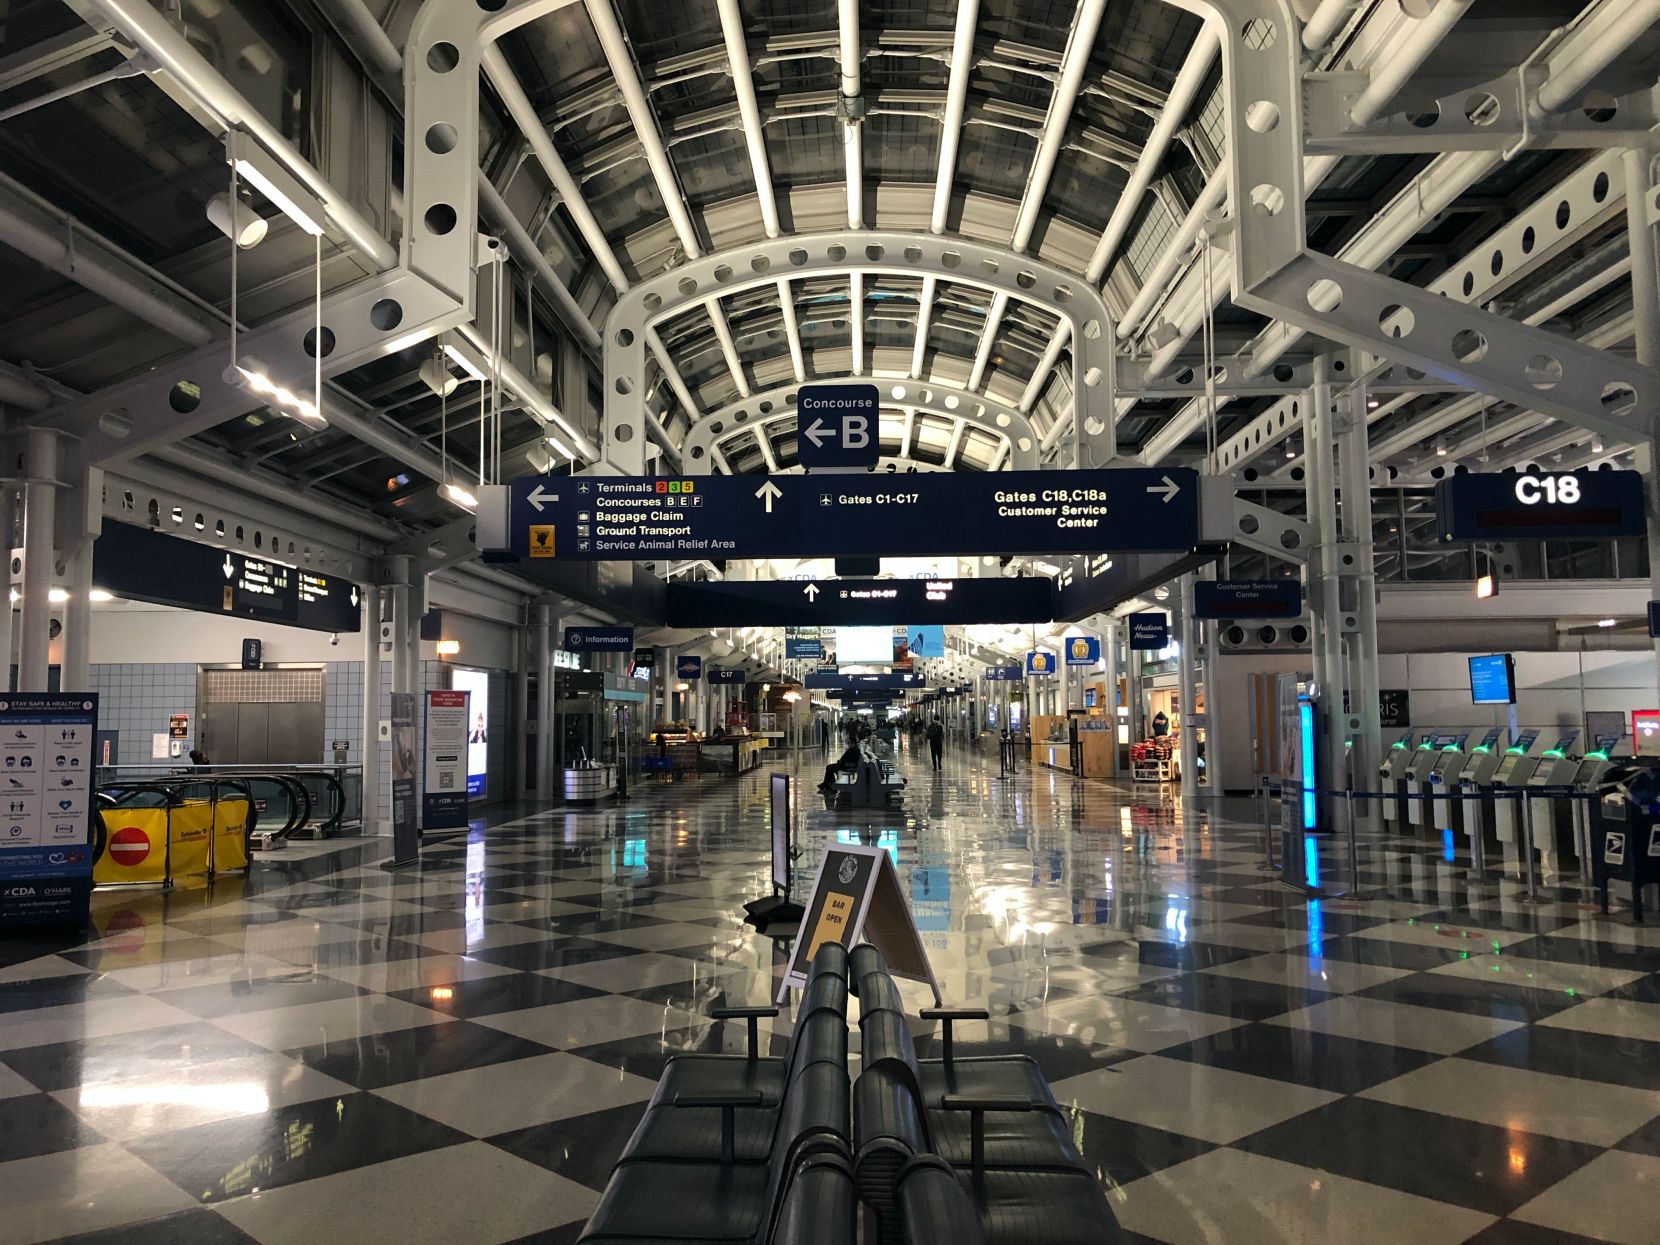 Concourse C at ORD, with very few people in it.